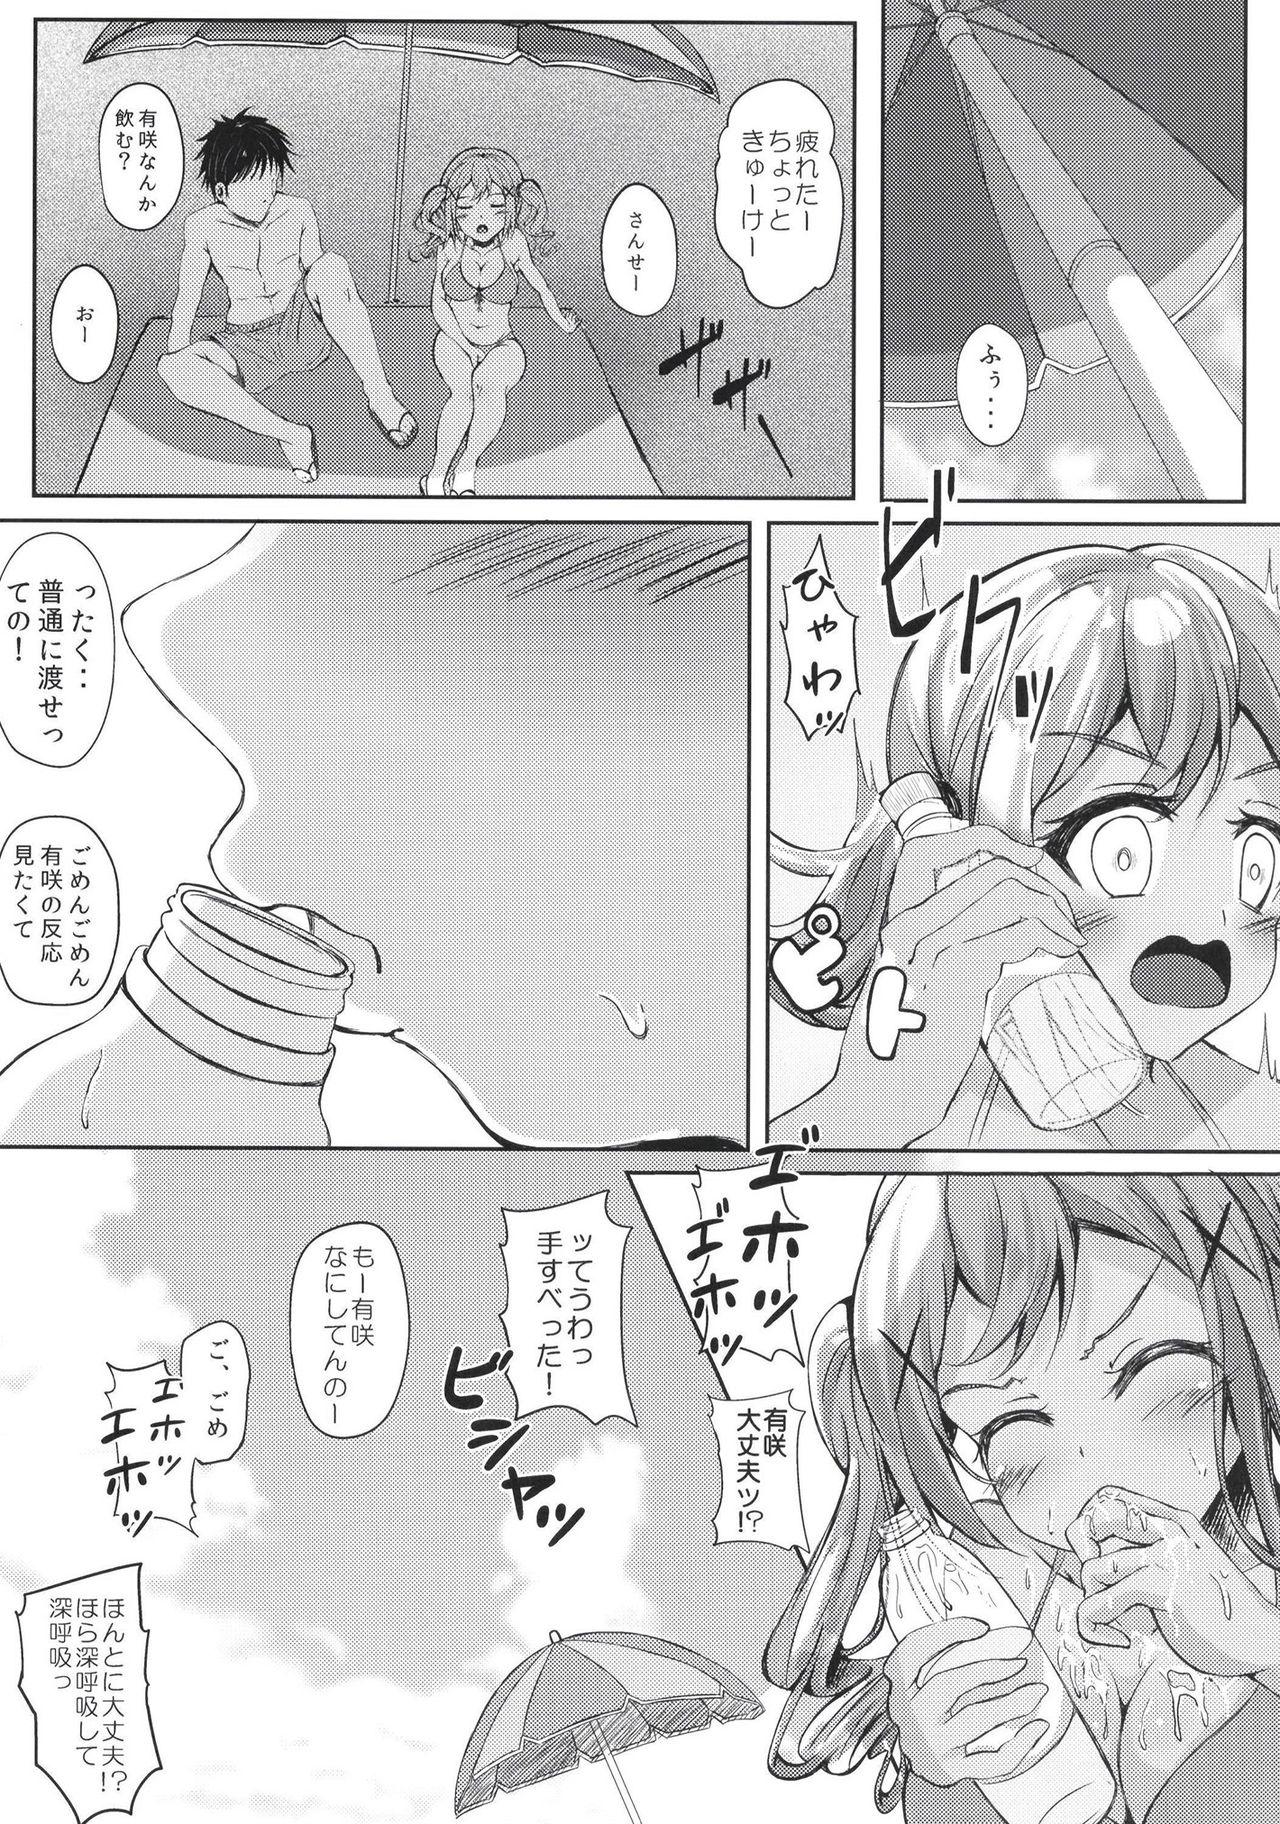 Milfsex private ~episode arisa 1.5 - Bang dream Stepfather - Page 6